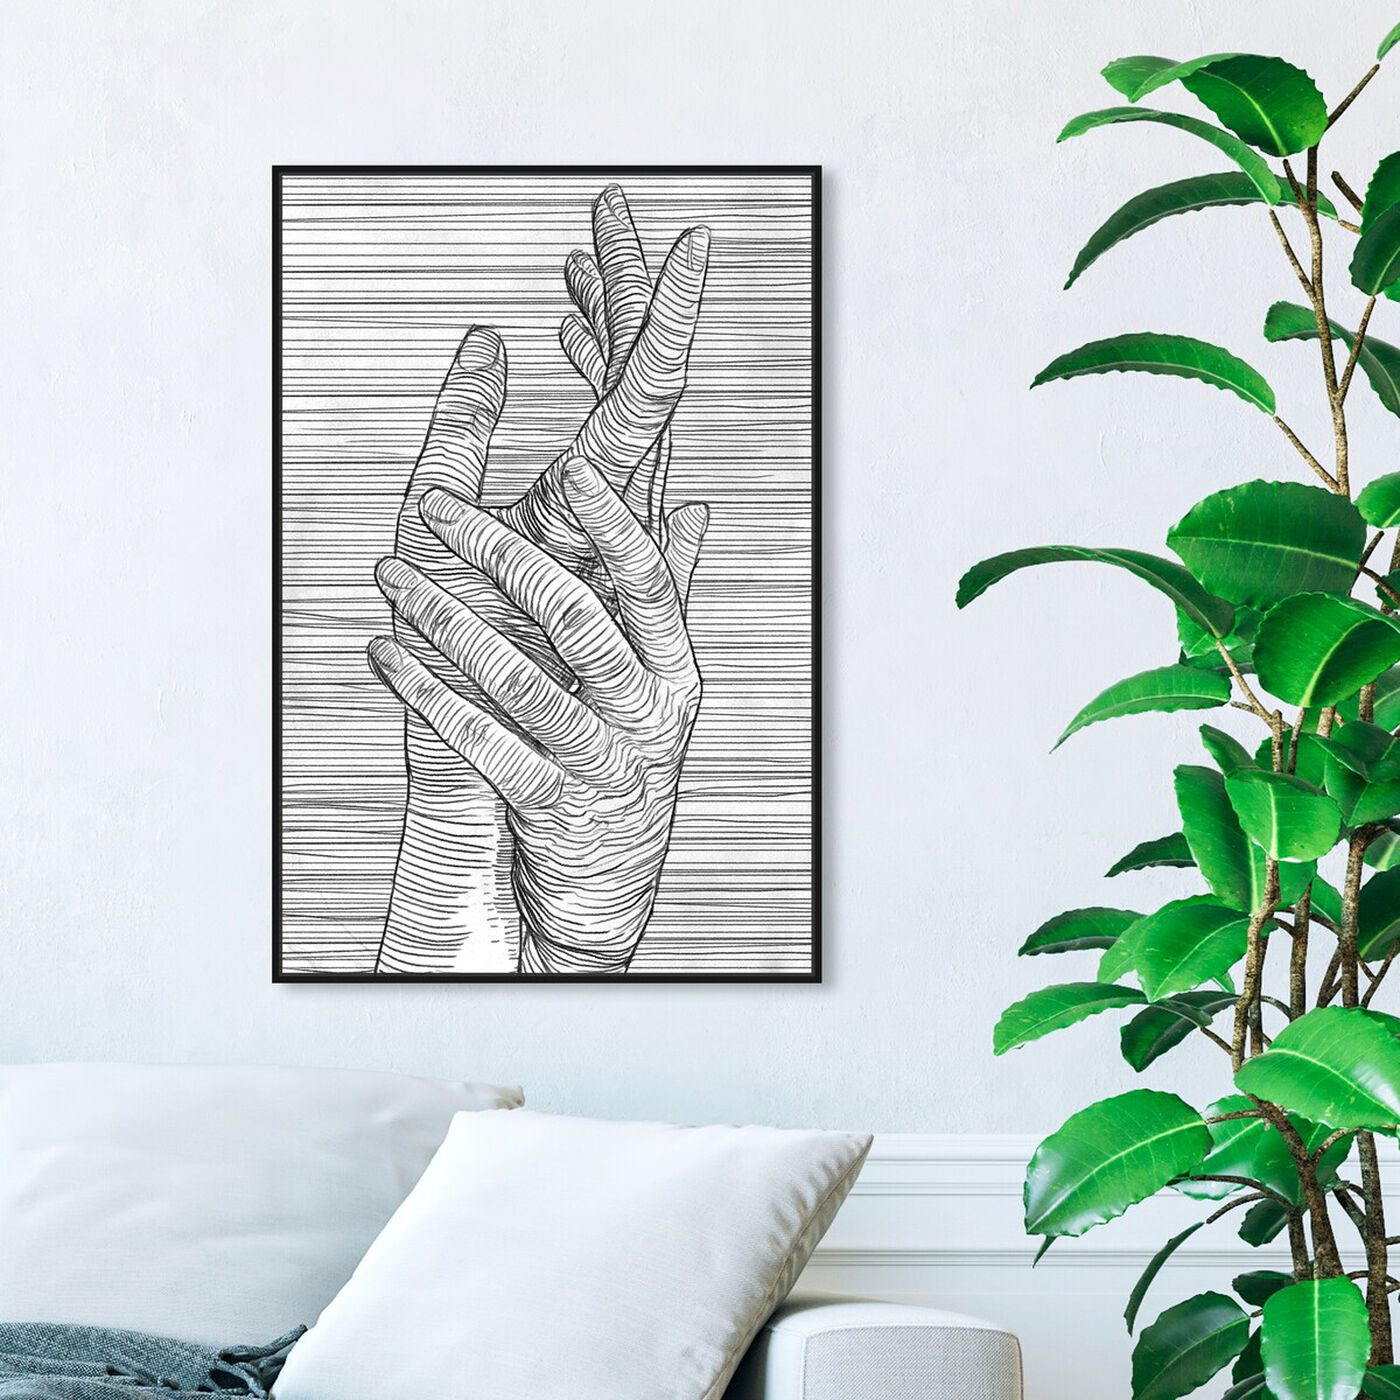 Hanging view of Linear Hands featuring abstract and shapes art.